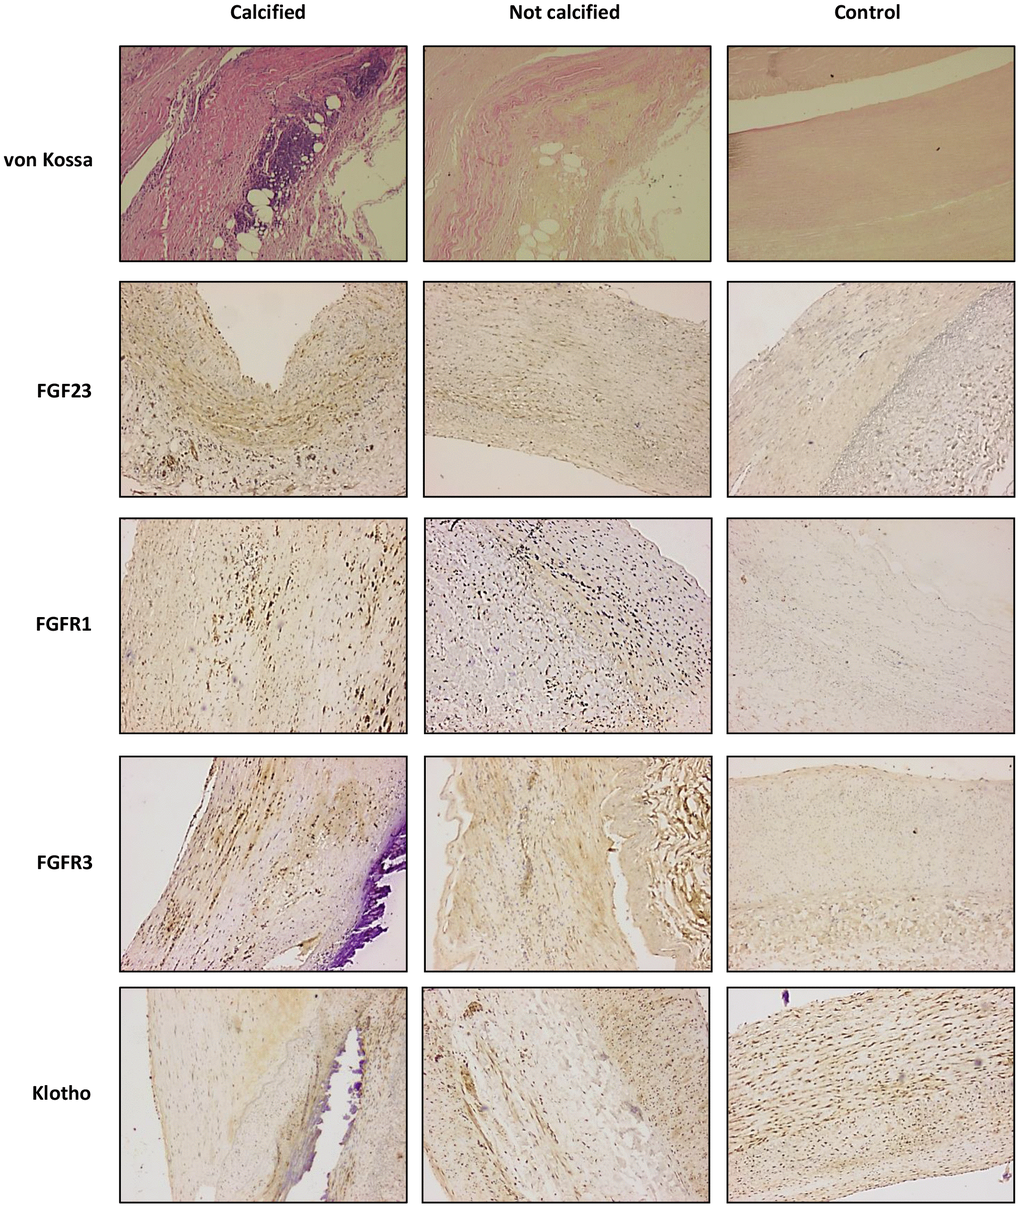 von Kossa and immunohistochemichal staining for FGF23, FGFR1, FGFR3 and Klotho, in sections of calcified and not calcified arteries of vascular surgery patients and in sections of control donors (magnification 4x).